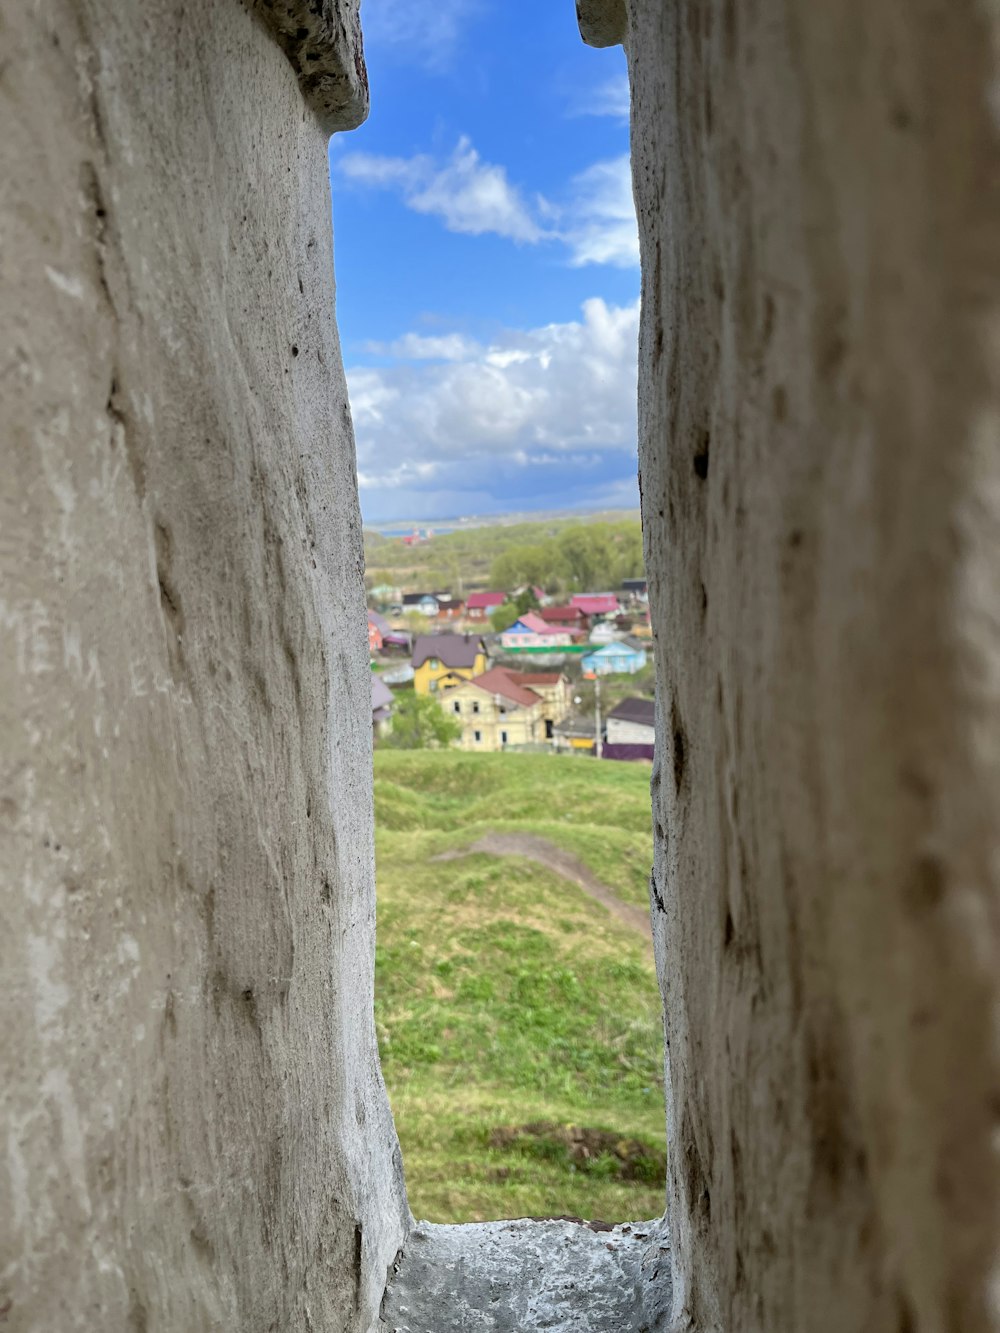 a view of a town from a window